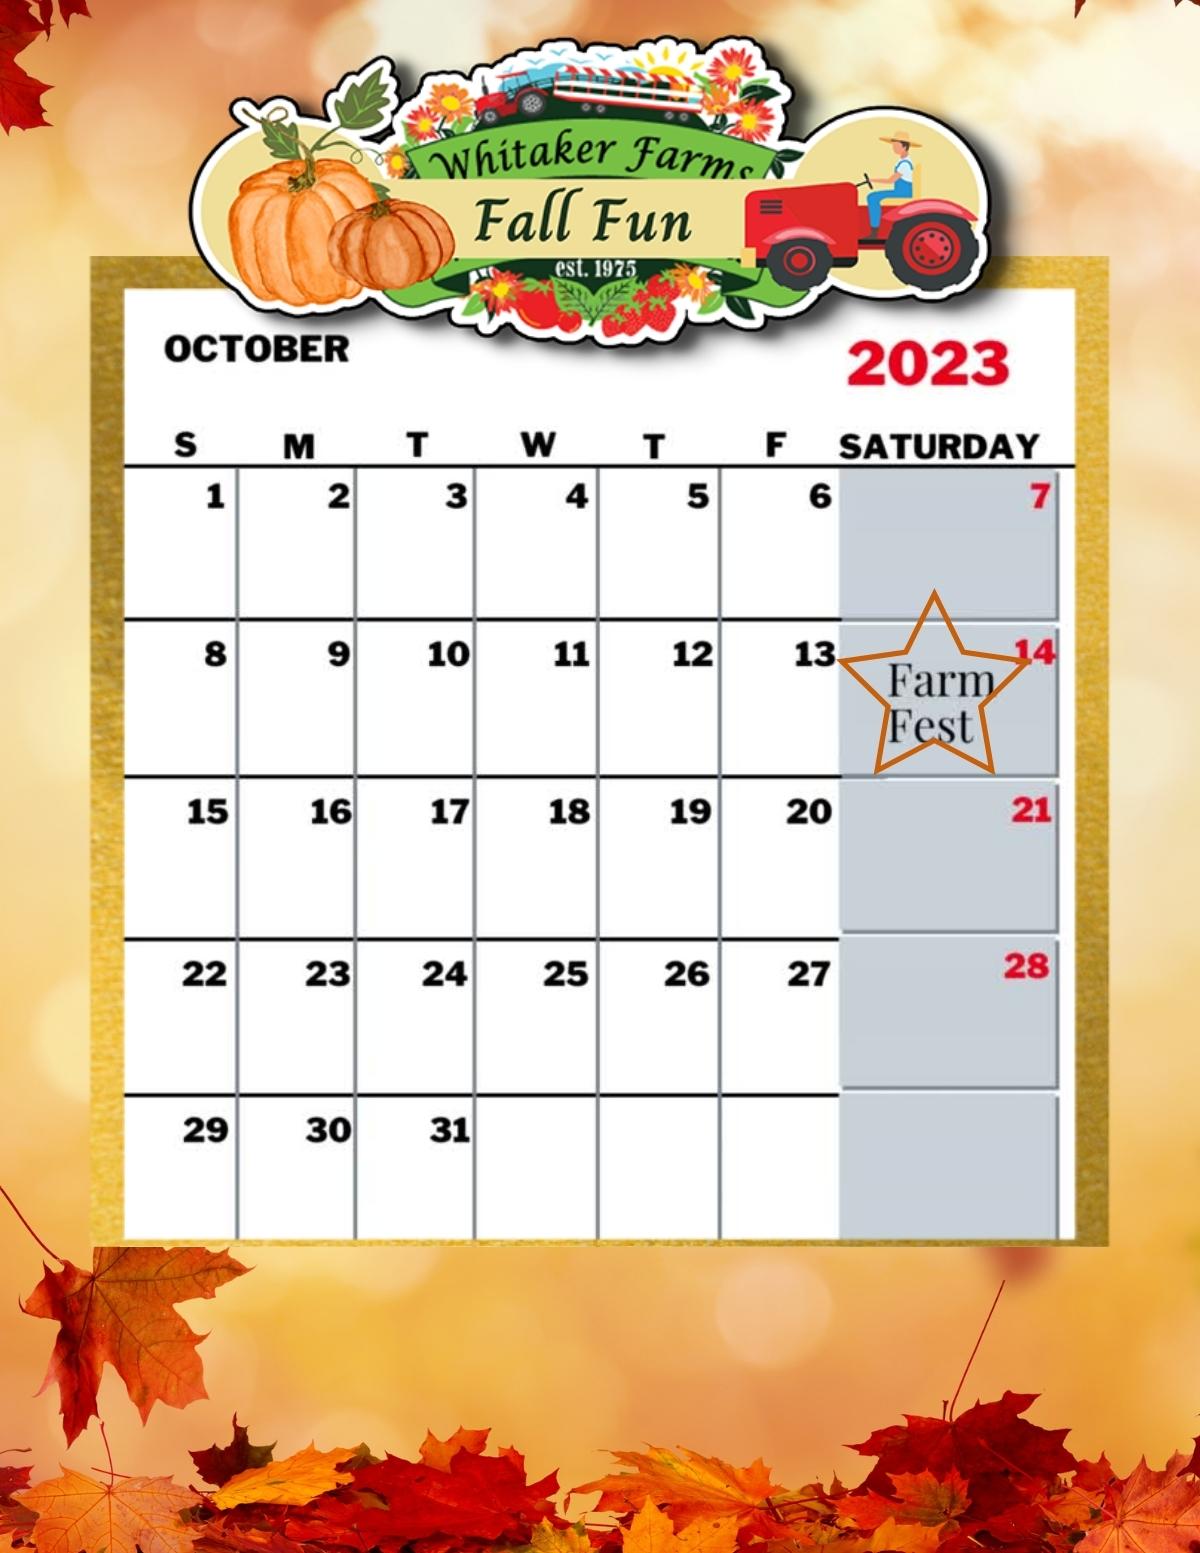 Fall Fun, Fall events, farm events, things to do with kids, kid activities, fairs and festivals